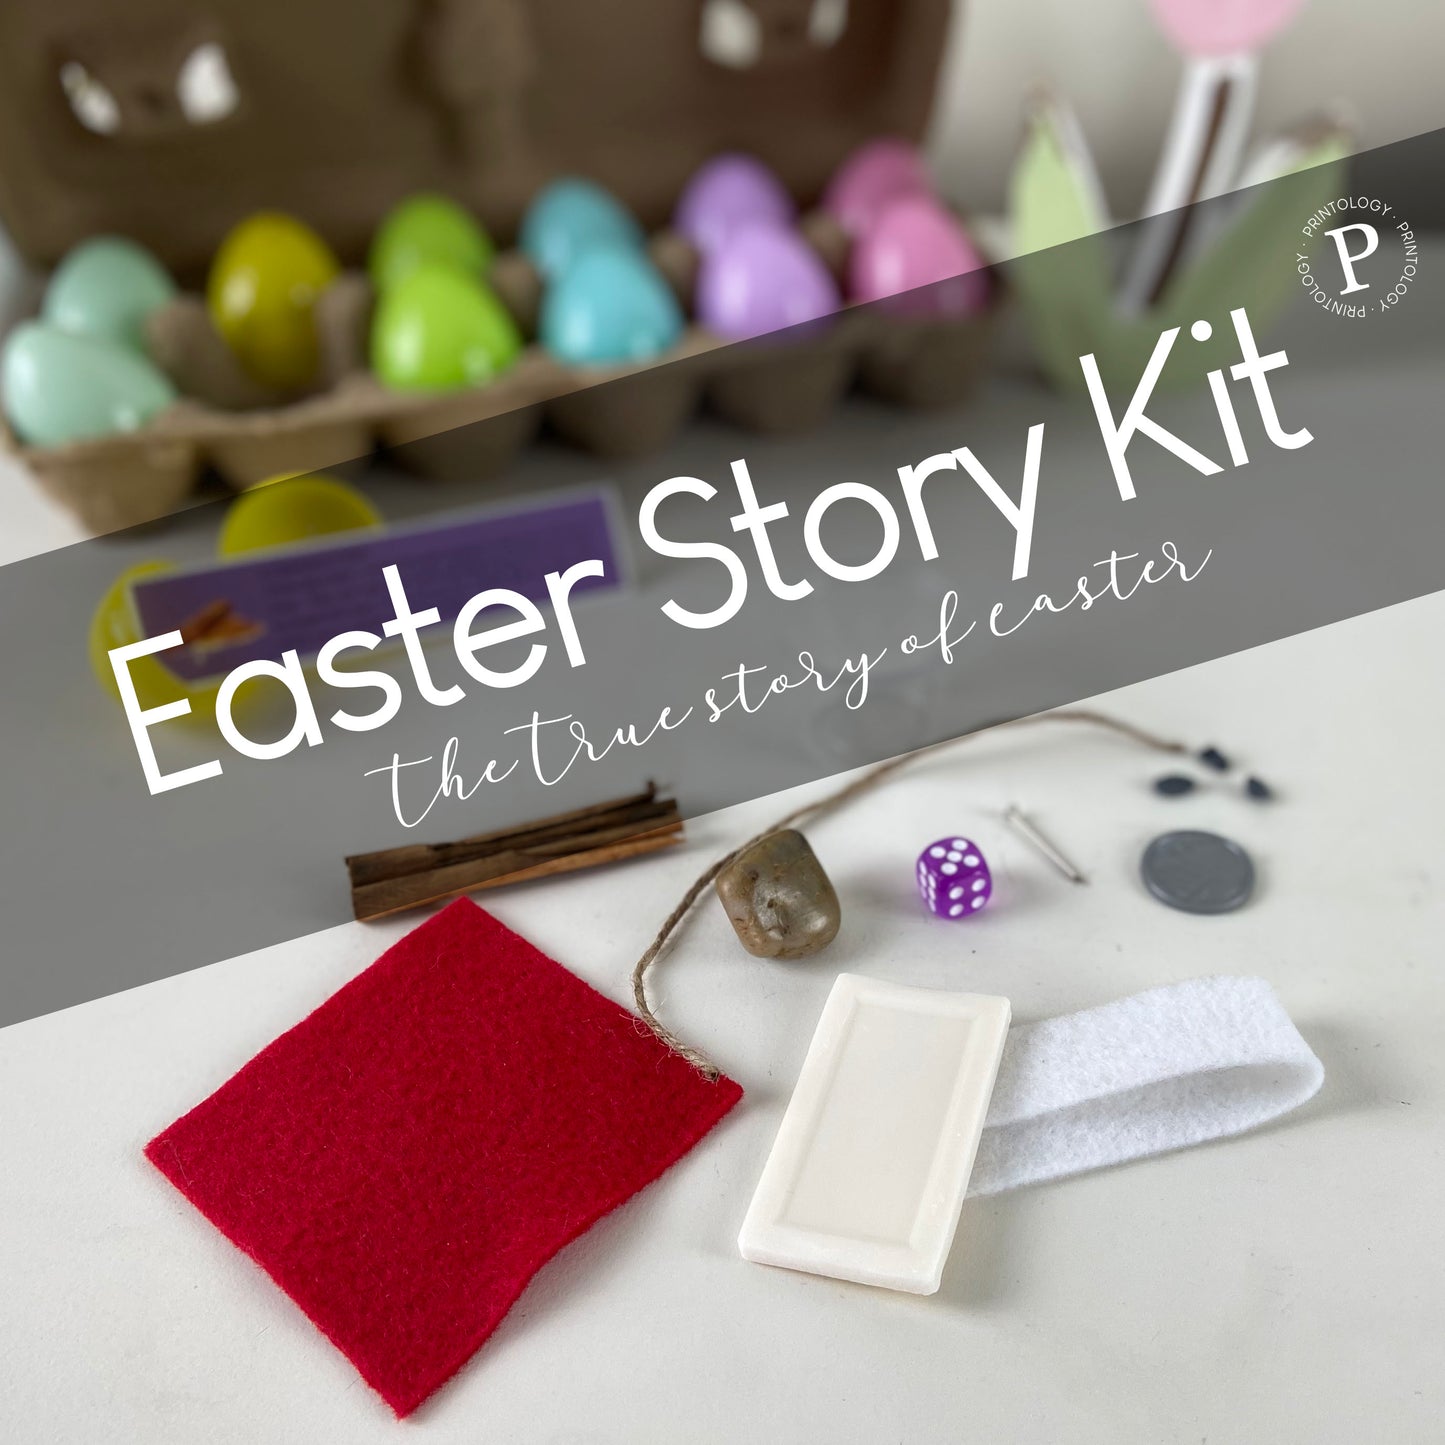 The Easter Story Kit